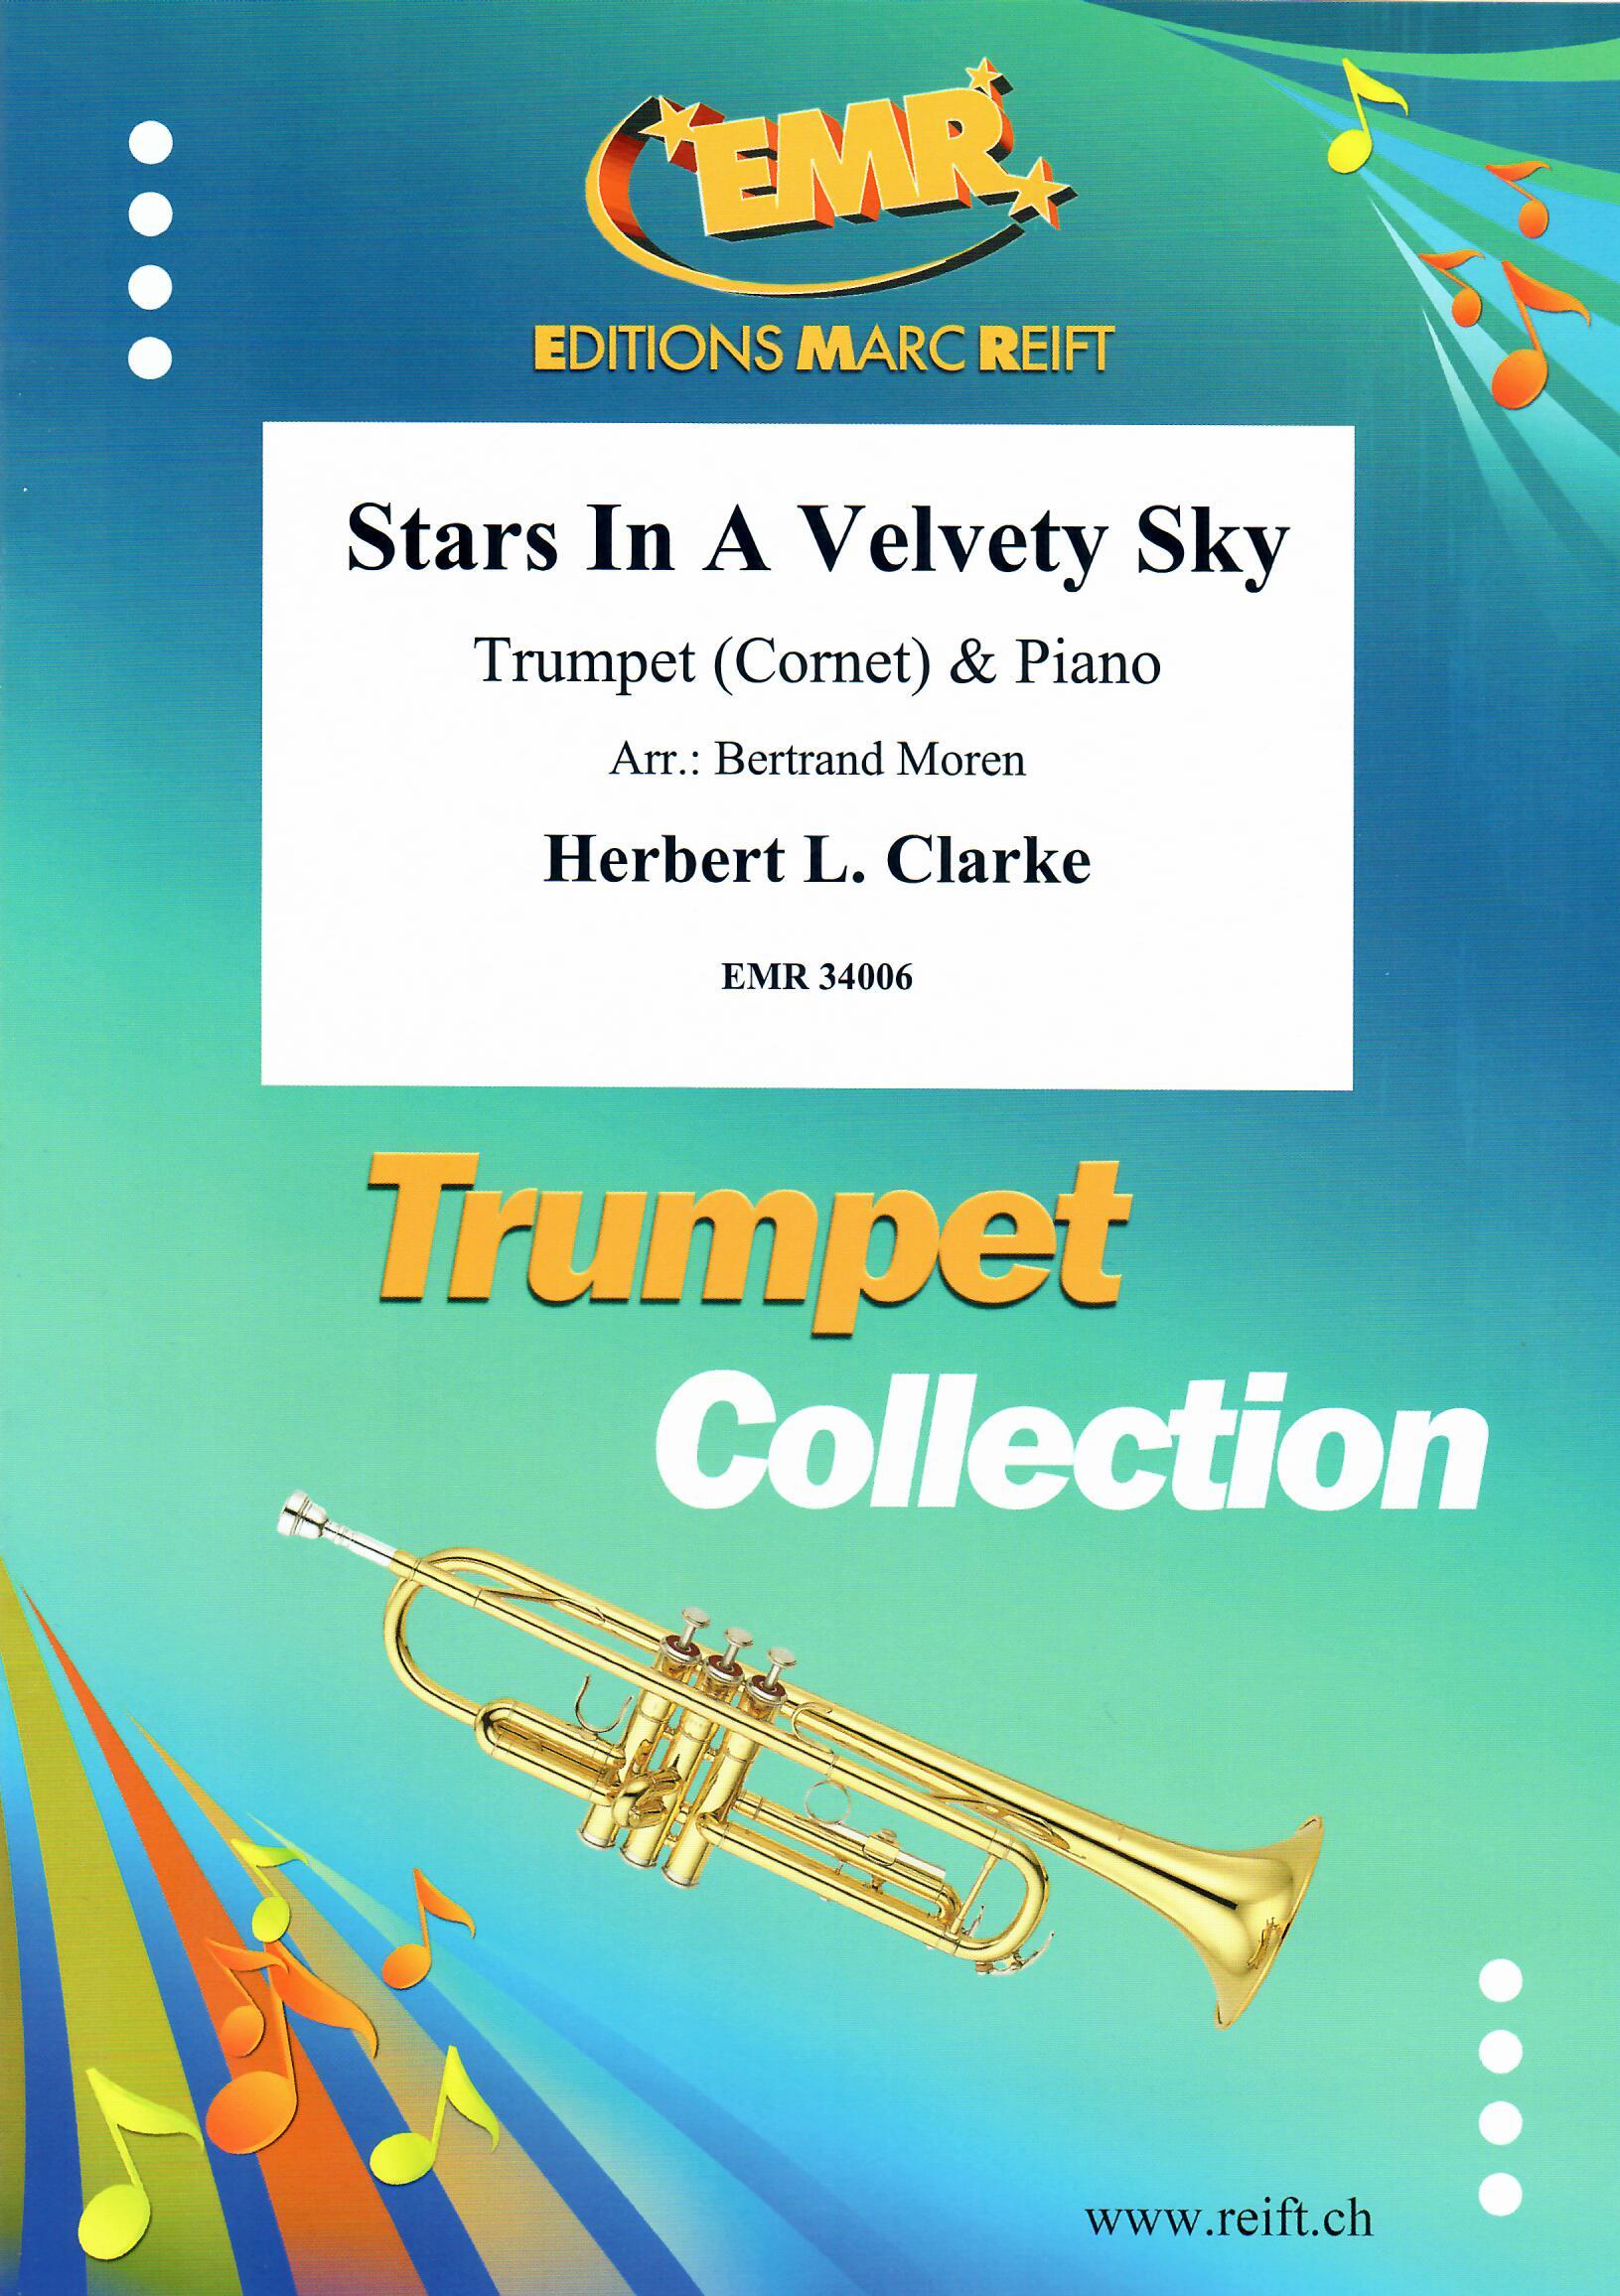 STARS IN A VELVETY SKY, SOLOS - B♭. Cornet/Trumpet with Piano